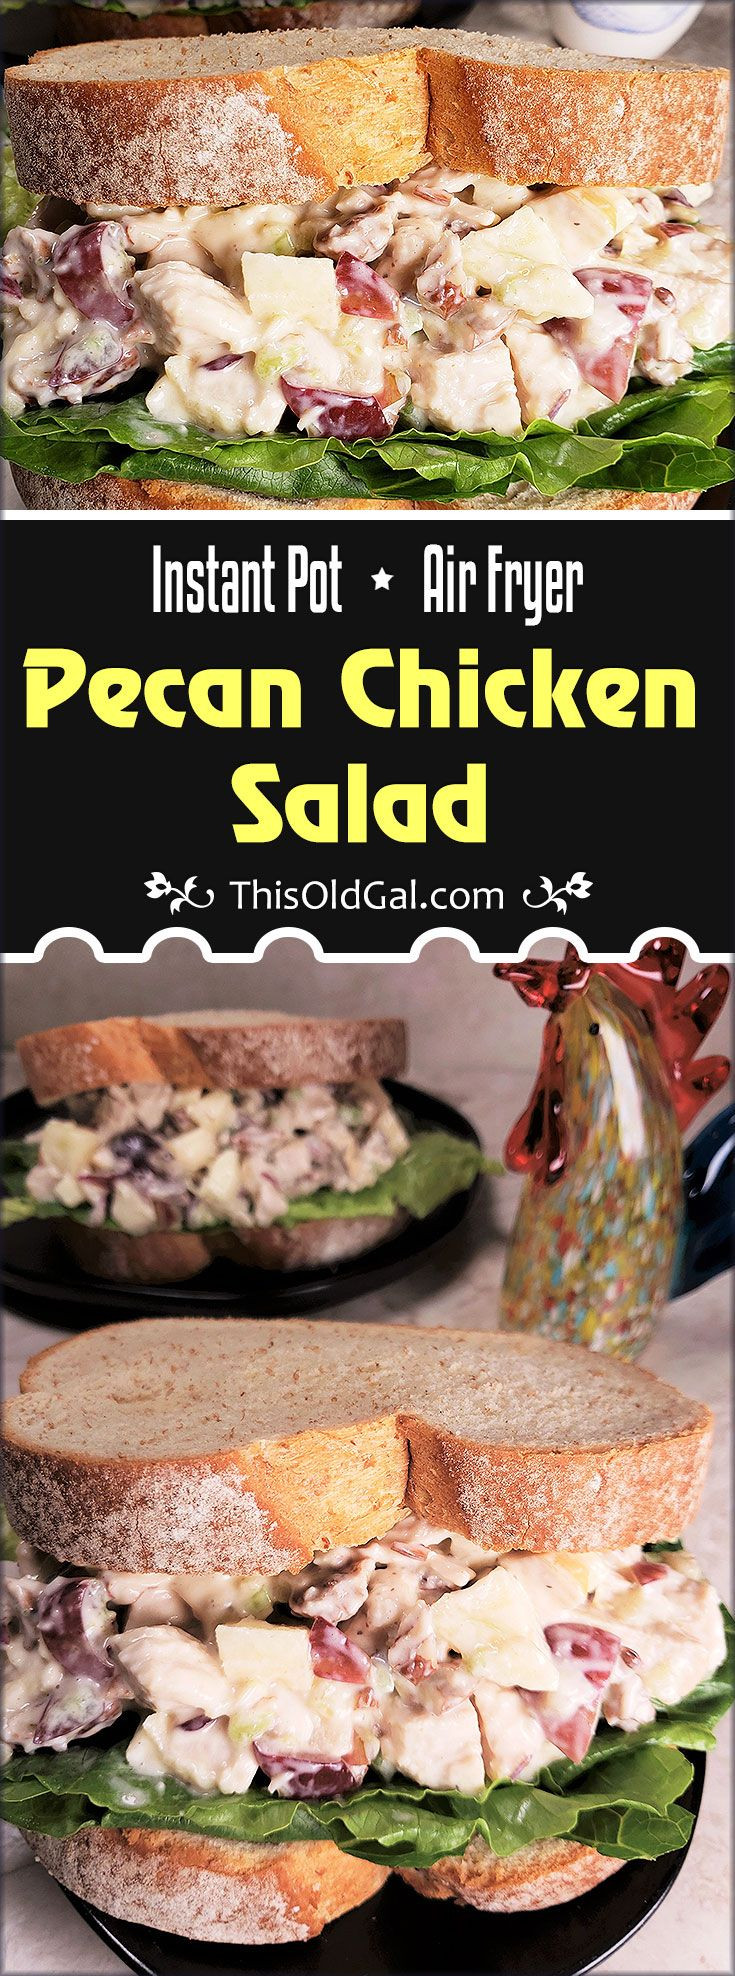 Arby'S Pecan Chicken Salad Sandwich
 For Arby s and enjoy your own homemade Pecan Chicken